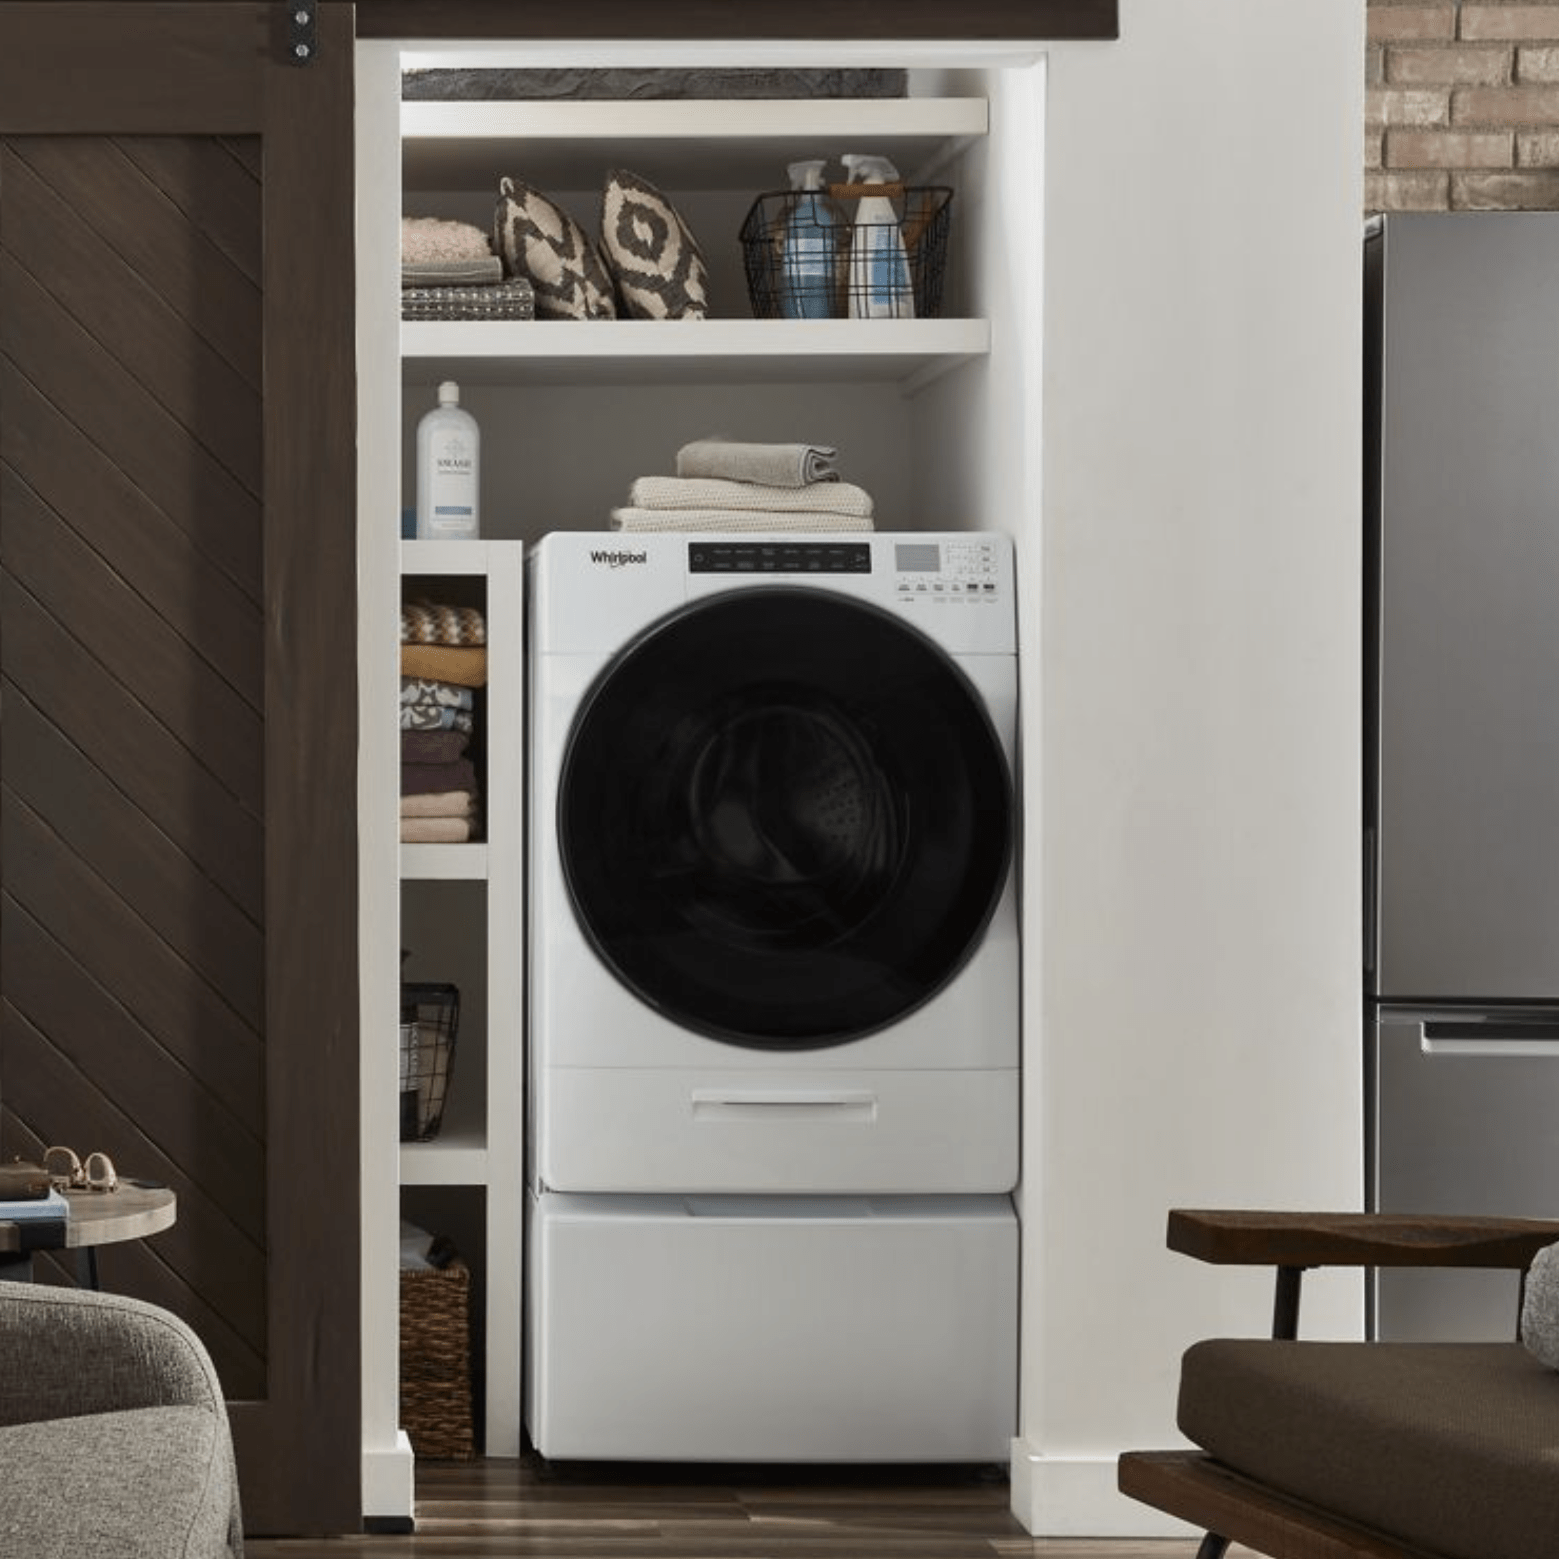 https://www.familyhandyman.com/wp-content/uploads/2023/03/Ventless-All-In-One-Washer-Dryer-via-whirlpool-e1678302972606.png